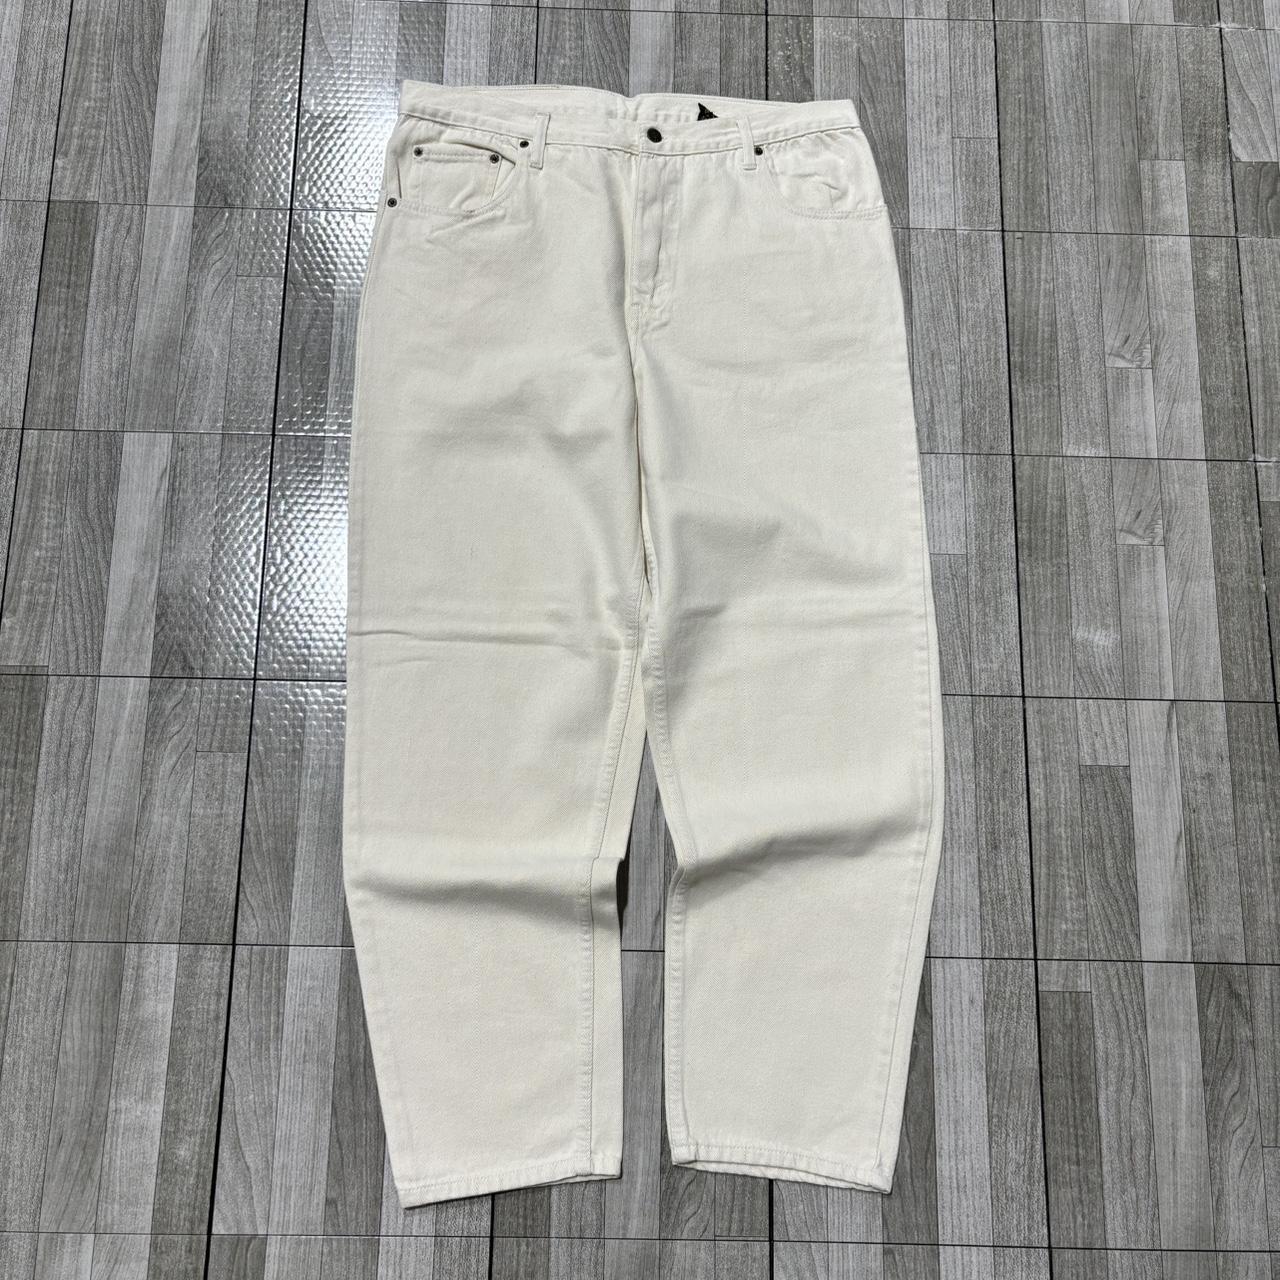 Baggy white silvertab style pants made in USA - Depop